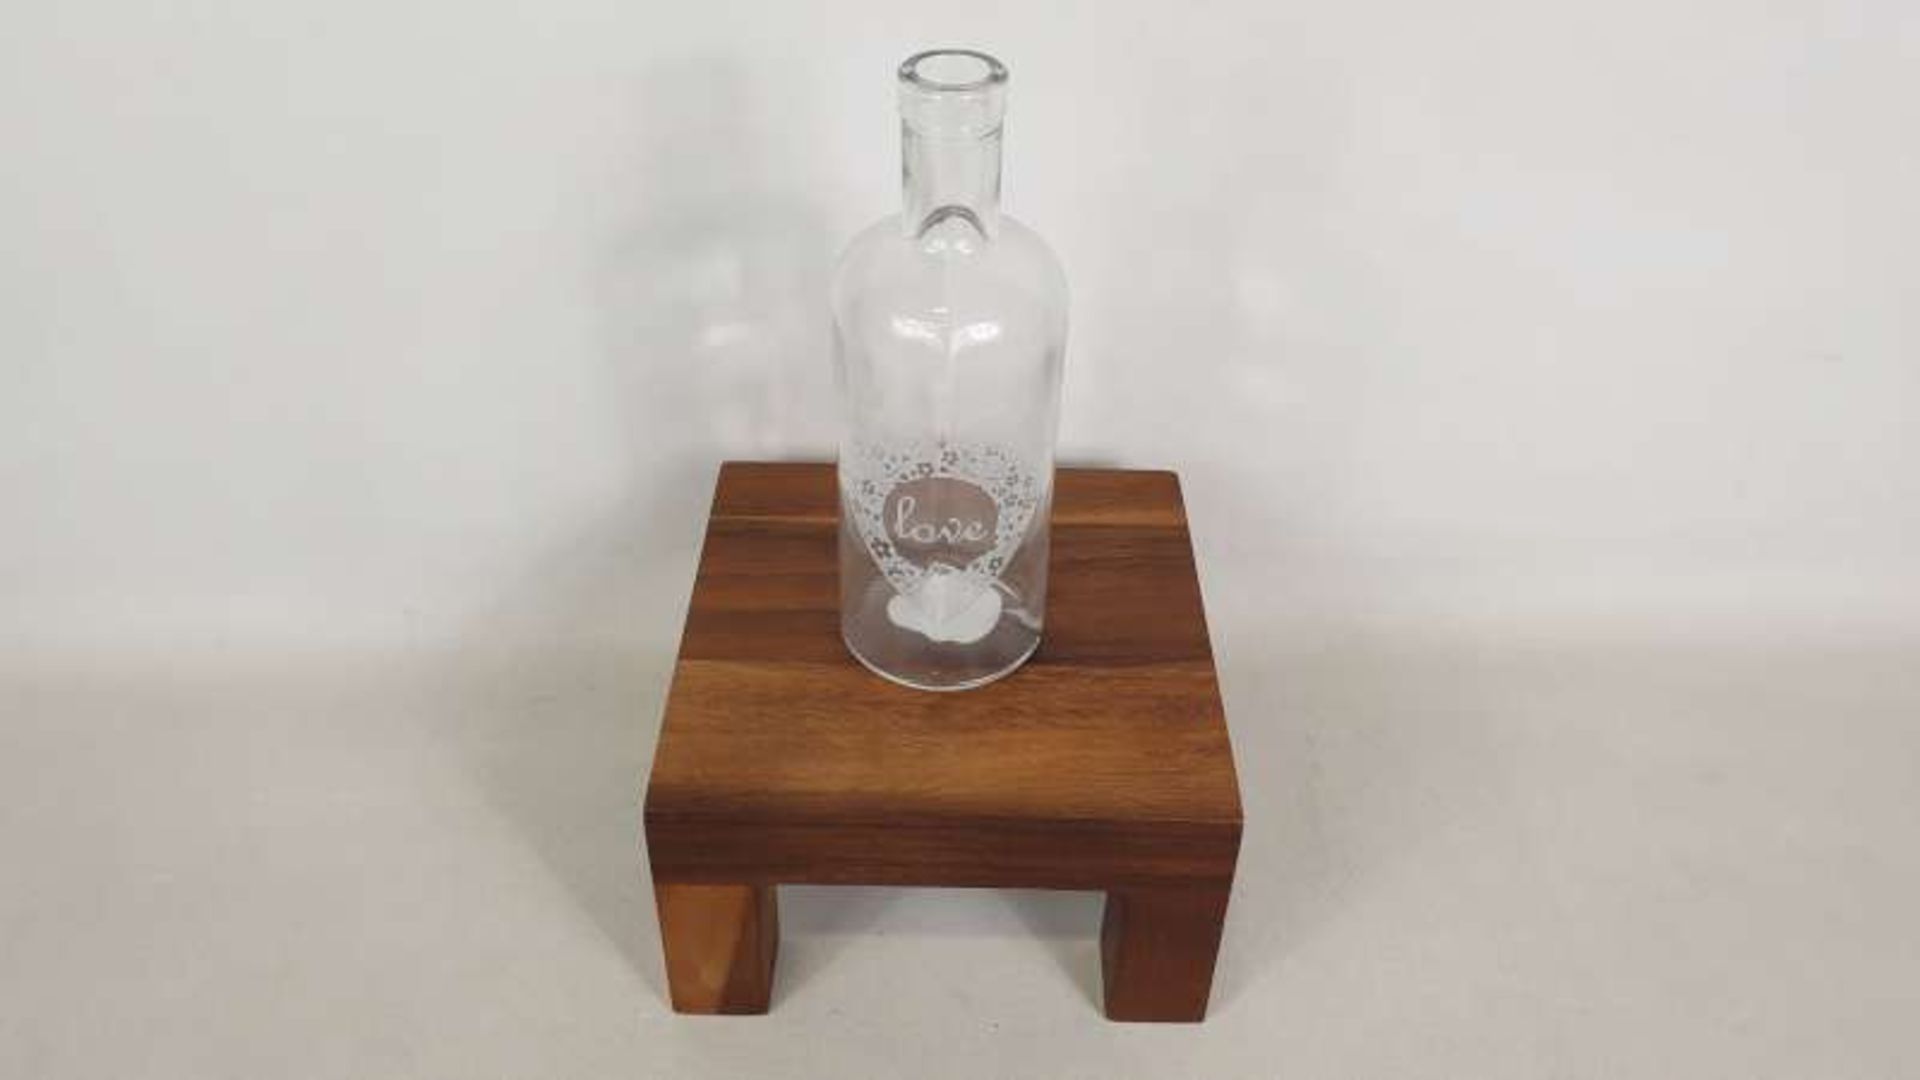 240 X BOTTLE VASE WITH LOVE HEART DETAIL IN 40 BOXES